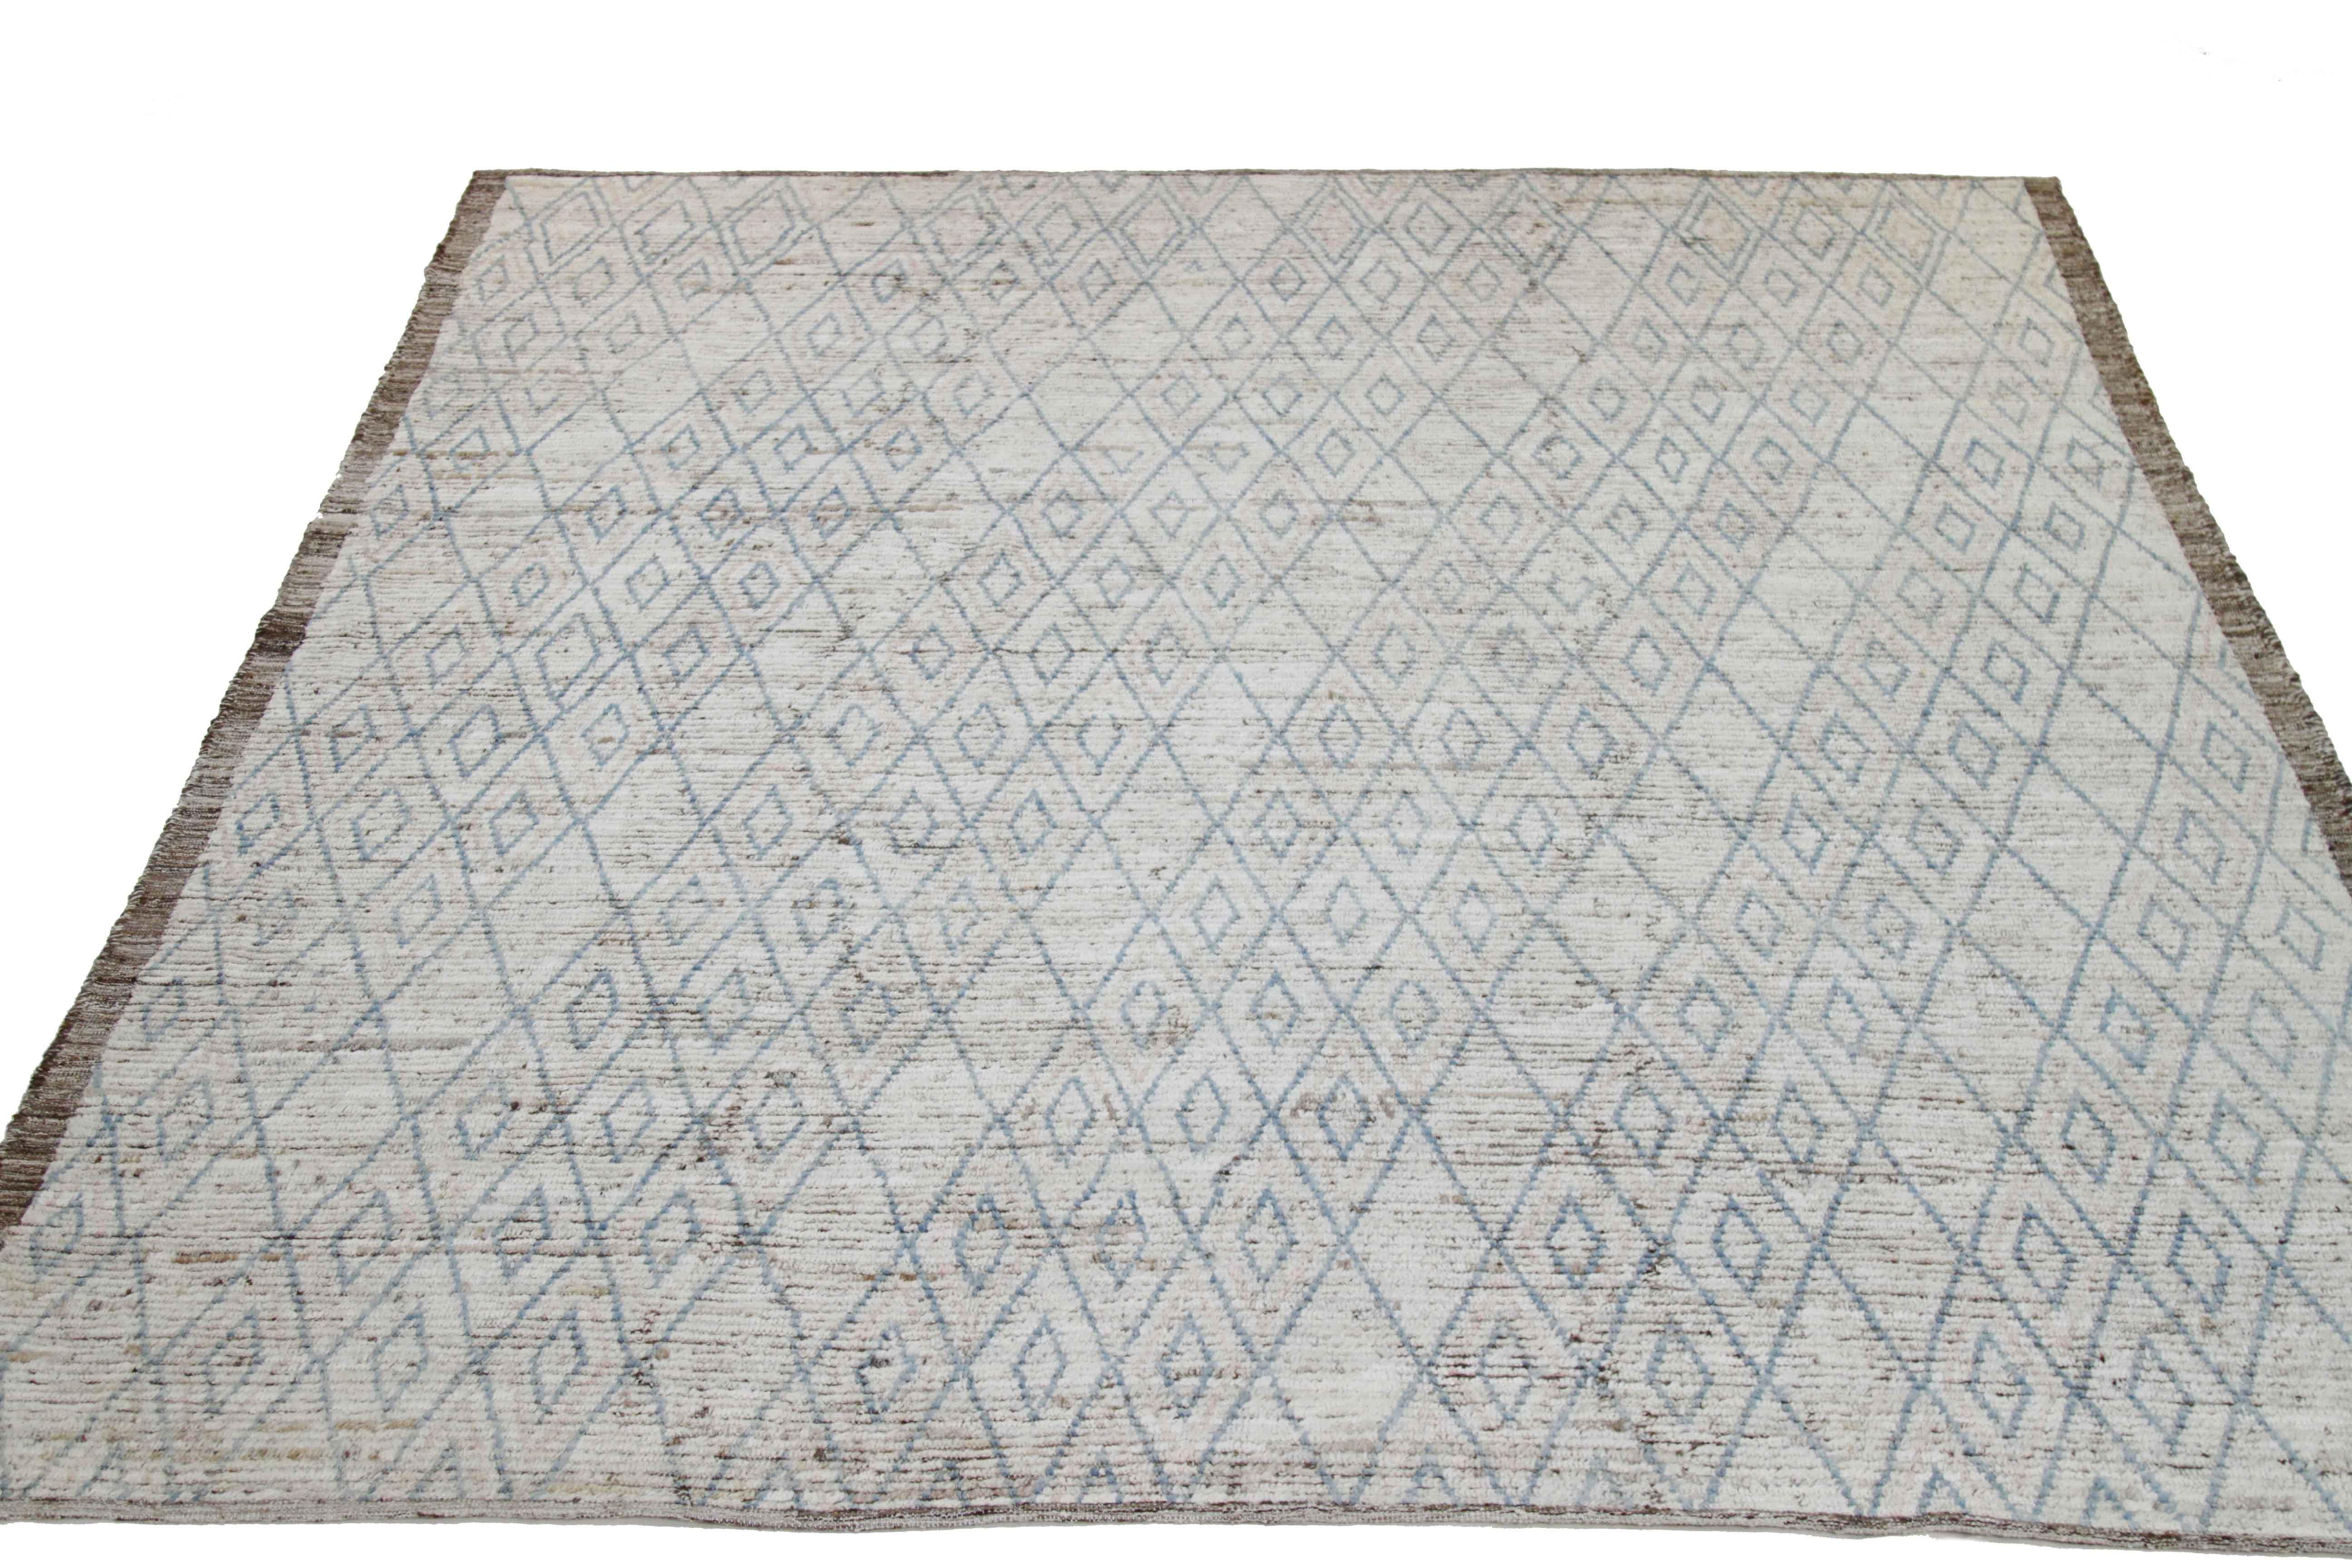 Modern Afghan rug handwoven from the finest sheep’s wool and colored with all-natural vegetable dyes that are safe for humans and pets. It’s a traditional Afghan weaving featuring a Moroccan inspired design highlighted by blue tribal diamond details